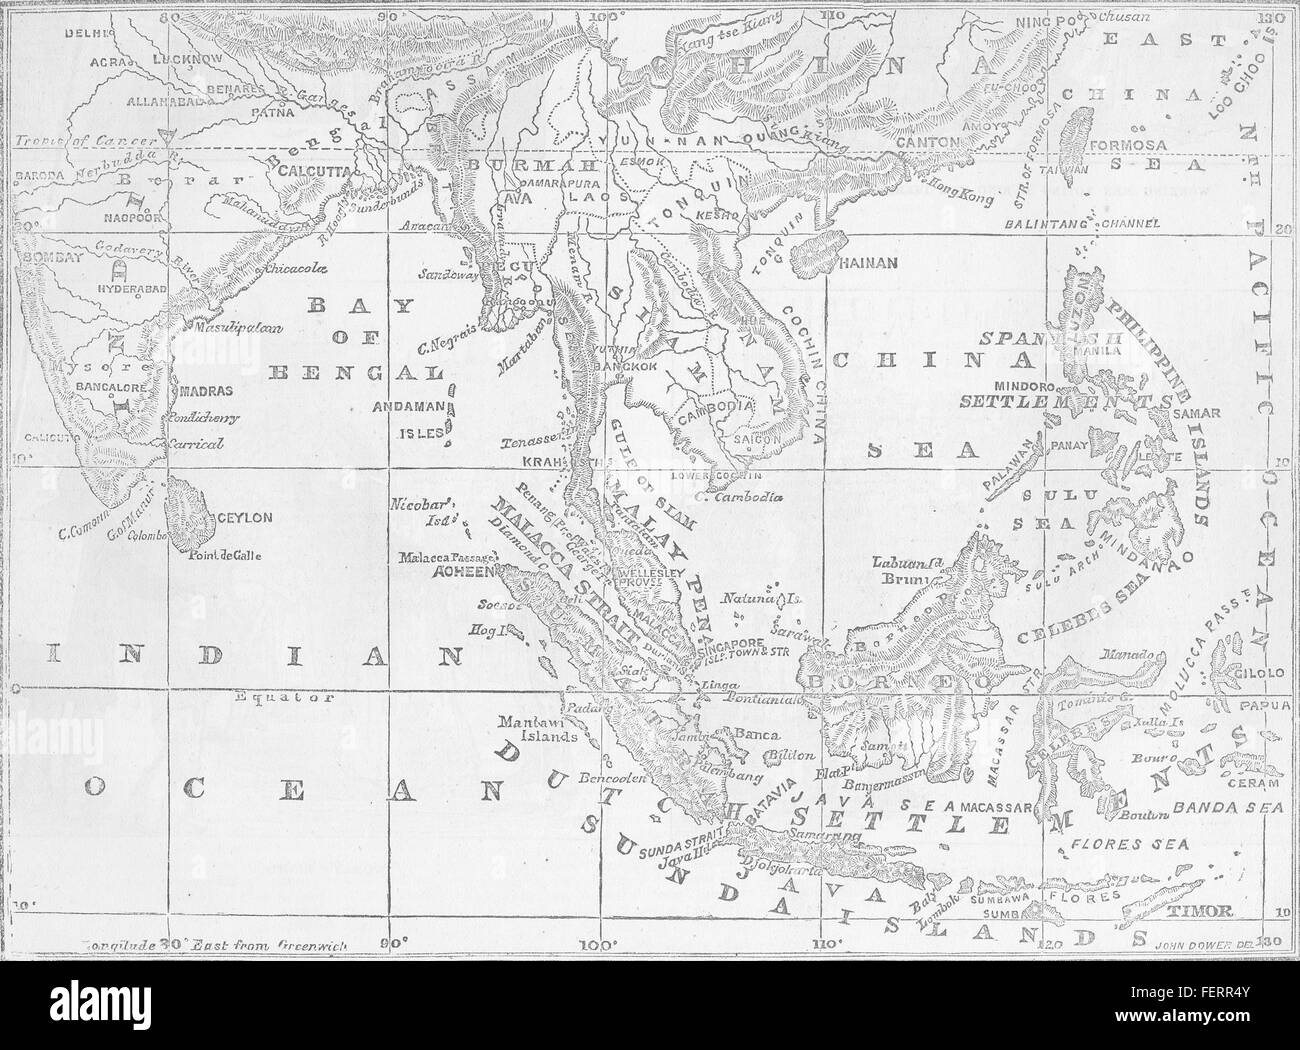 INDONESIA Aceh War Map of the Malacca Strait 1874. Illustrated London News Stock Photo